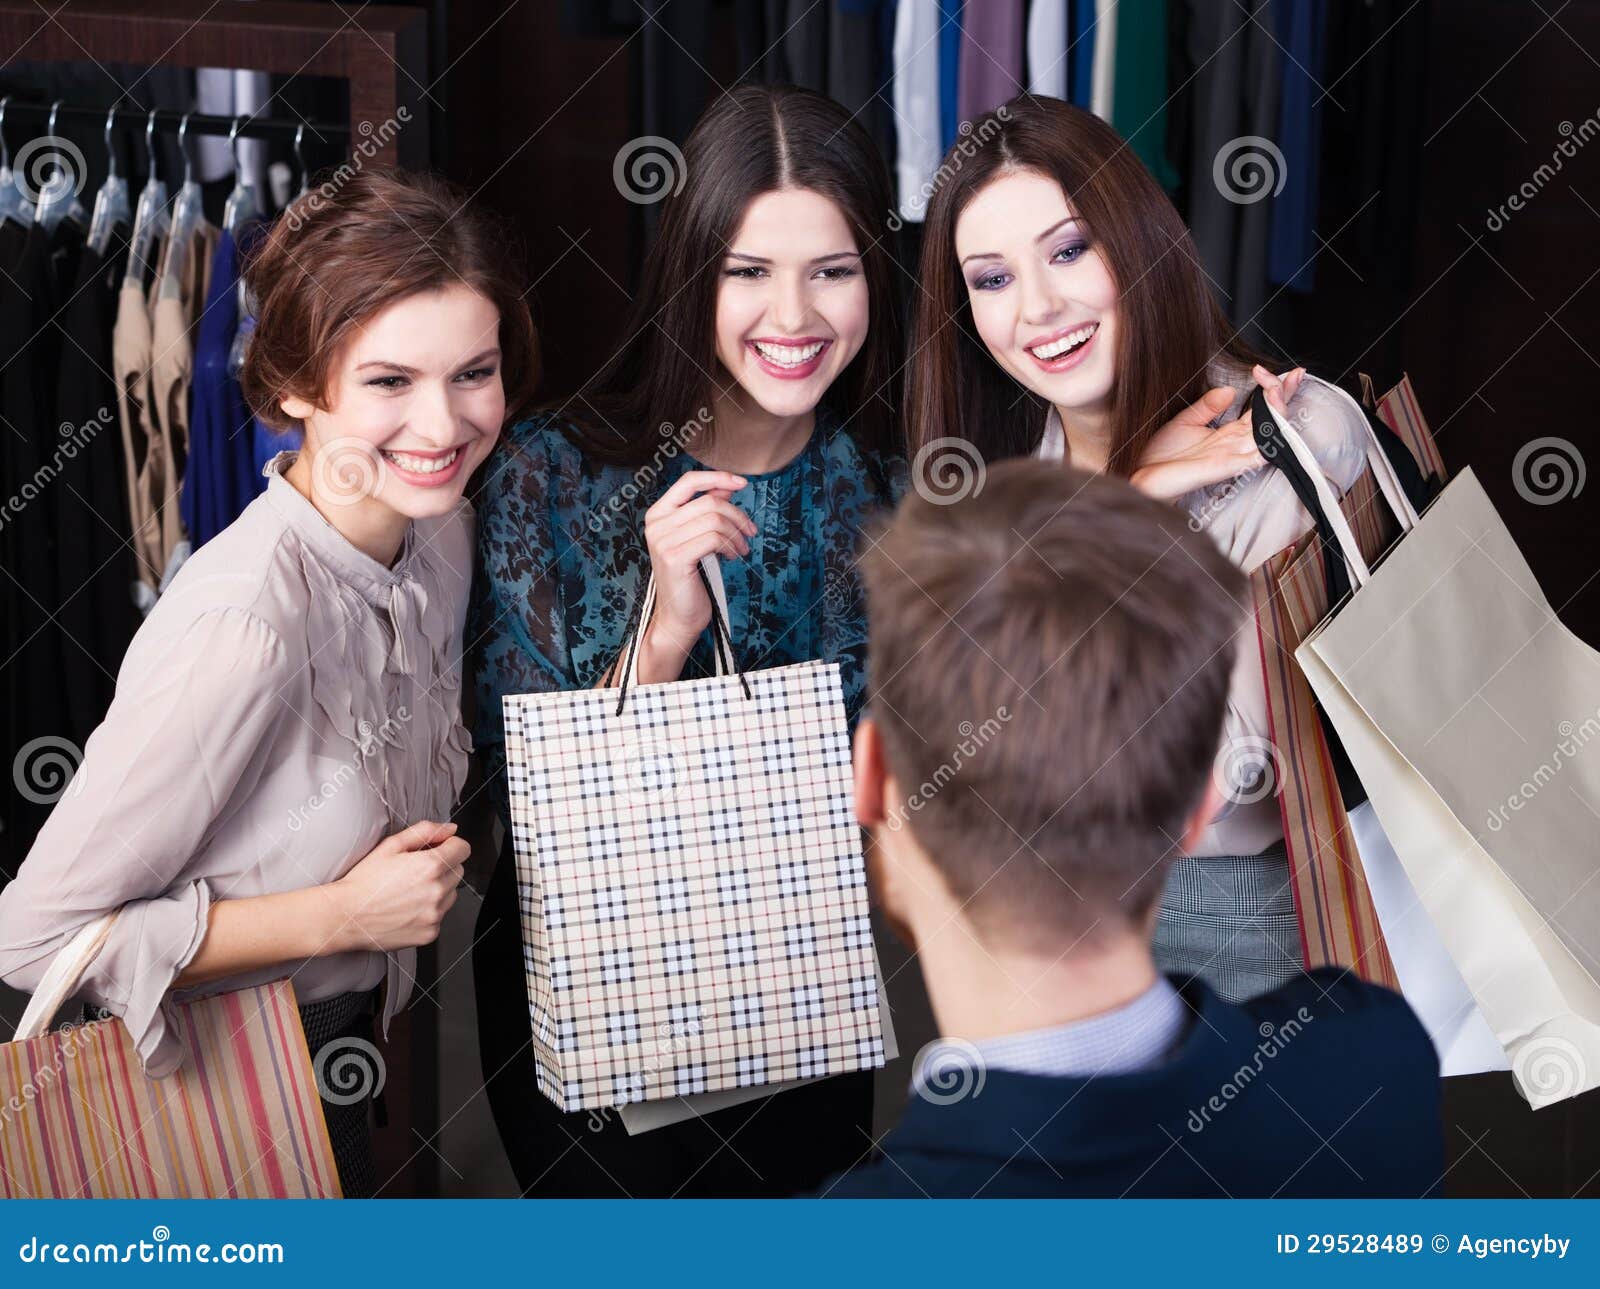 Women Consult with Shop Assistant Stock Image - Image of collection ...